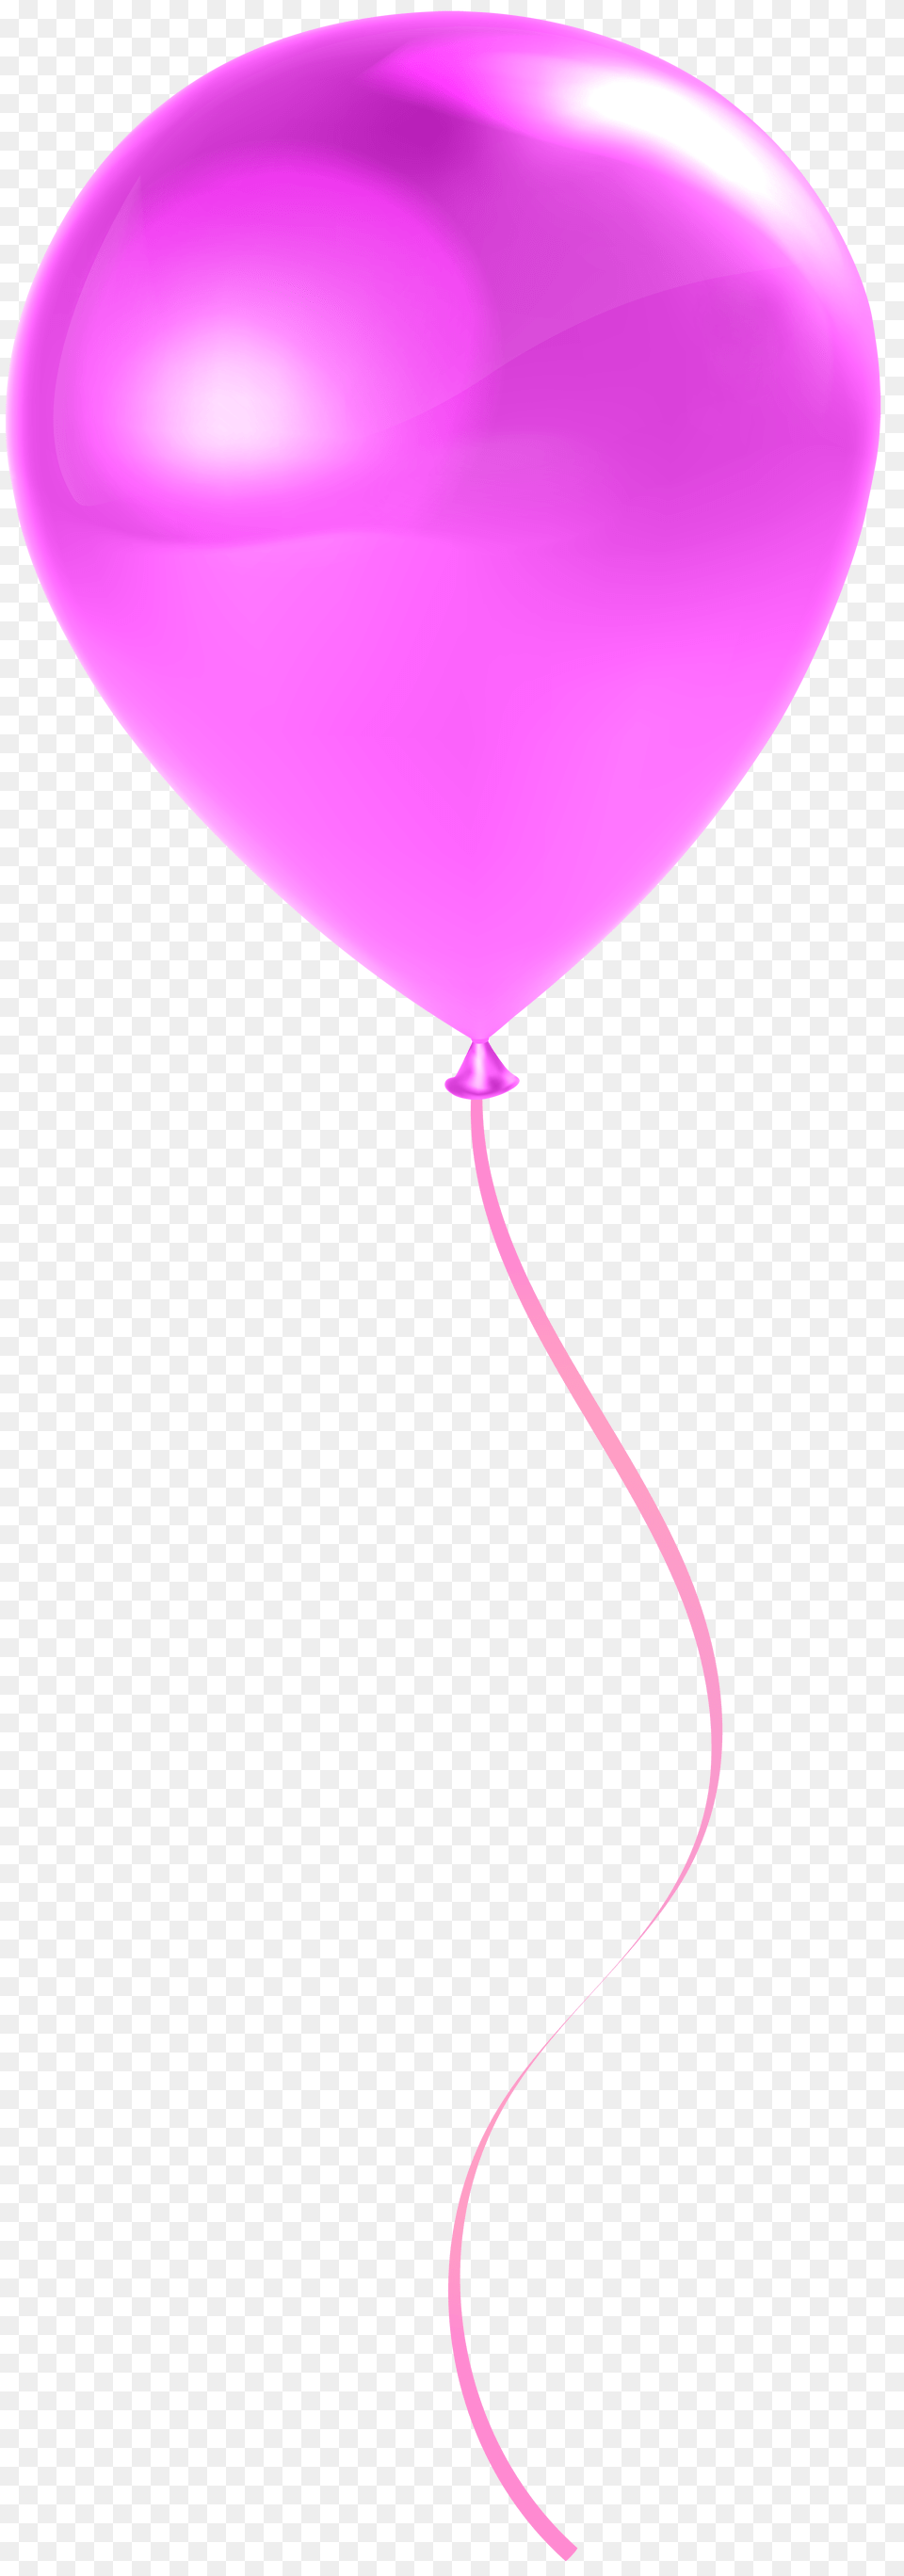 Balloons Tube Balloon Pink Balloon, Cutlery, Spoon, Purple Free Png Download